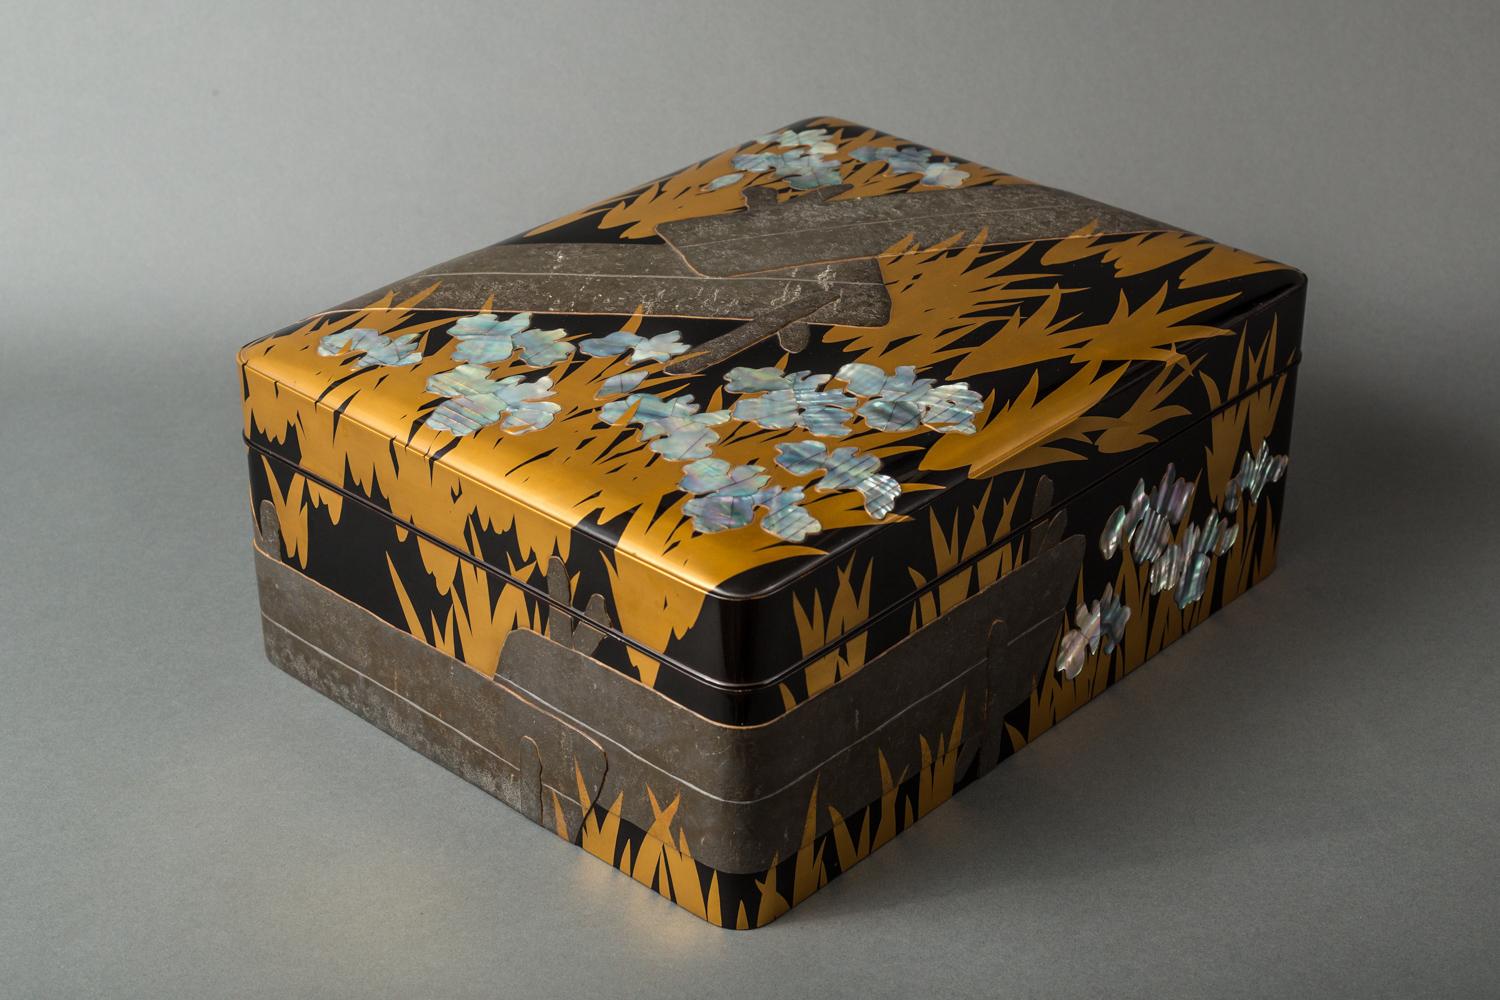 Gold and shell inlay marsh irises with pewter walkway wrapping around box, a Korin style subject matter. Nashiji ground interior and bottom with artist signature inside the lid, reads: Iwayama.
Comes in original storage box, (calligraphy on box